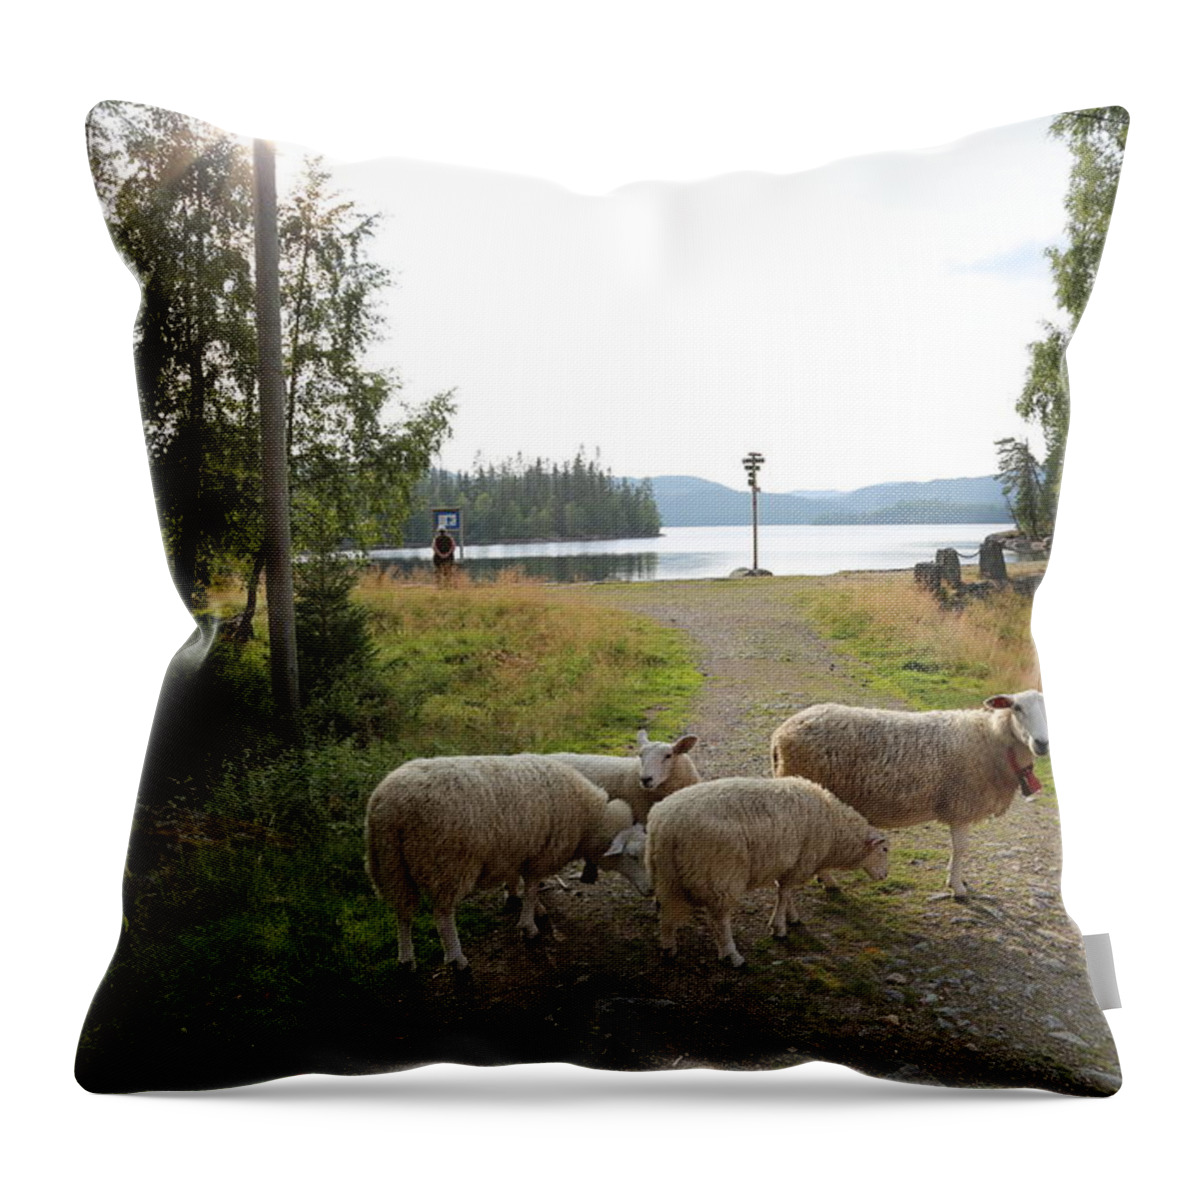 Sheep Animal Farm Animals Waterfront Water Summer Woods Forrest Outdoors Trees View Panorama Reflection Plants Vegetation Sky Tree Hiking Fieldtrip Norway Scandinavia Europe Landscape Water Photo Throw Pillow featuring the digital art Sheeps by the Lake by Jeanette Rode Dybdahl